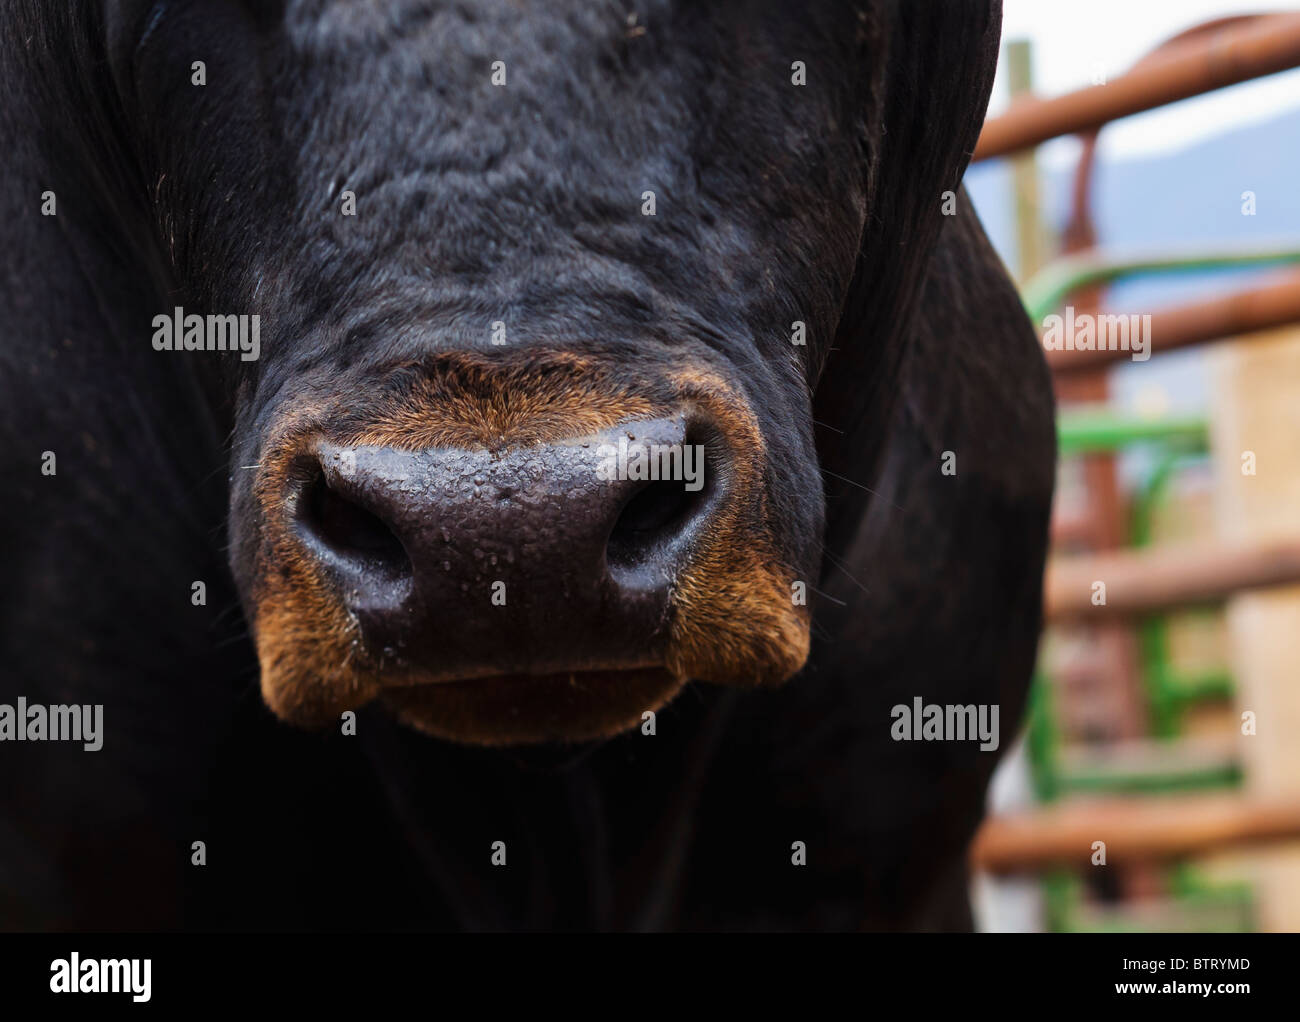 Head on low angle view of a large black bull in a pen. Focus on nose. Stock Photo